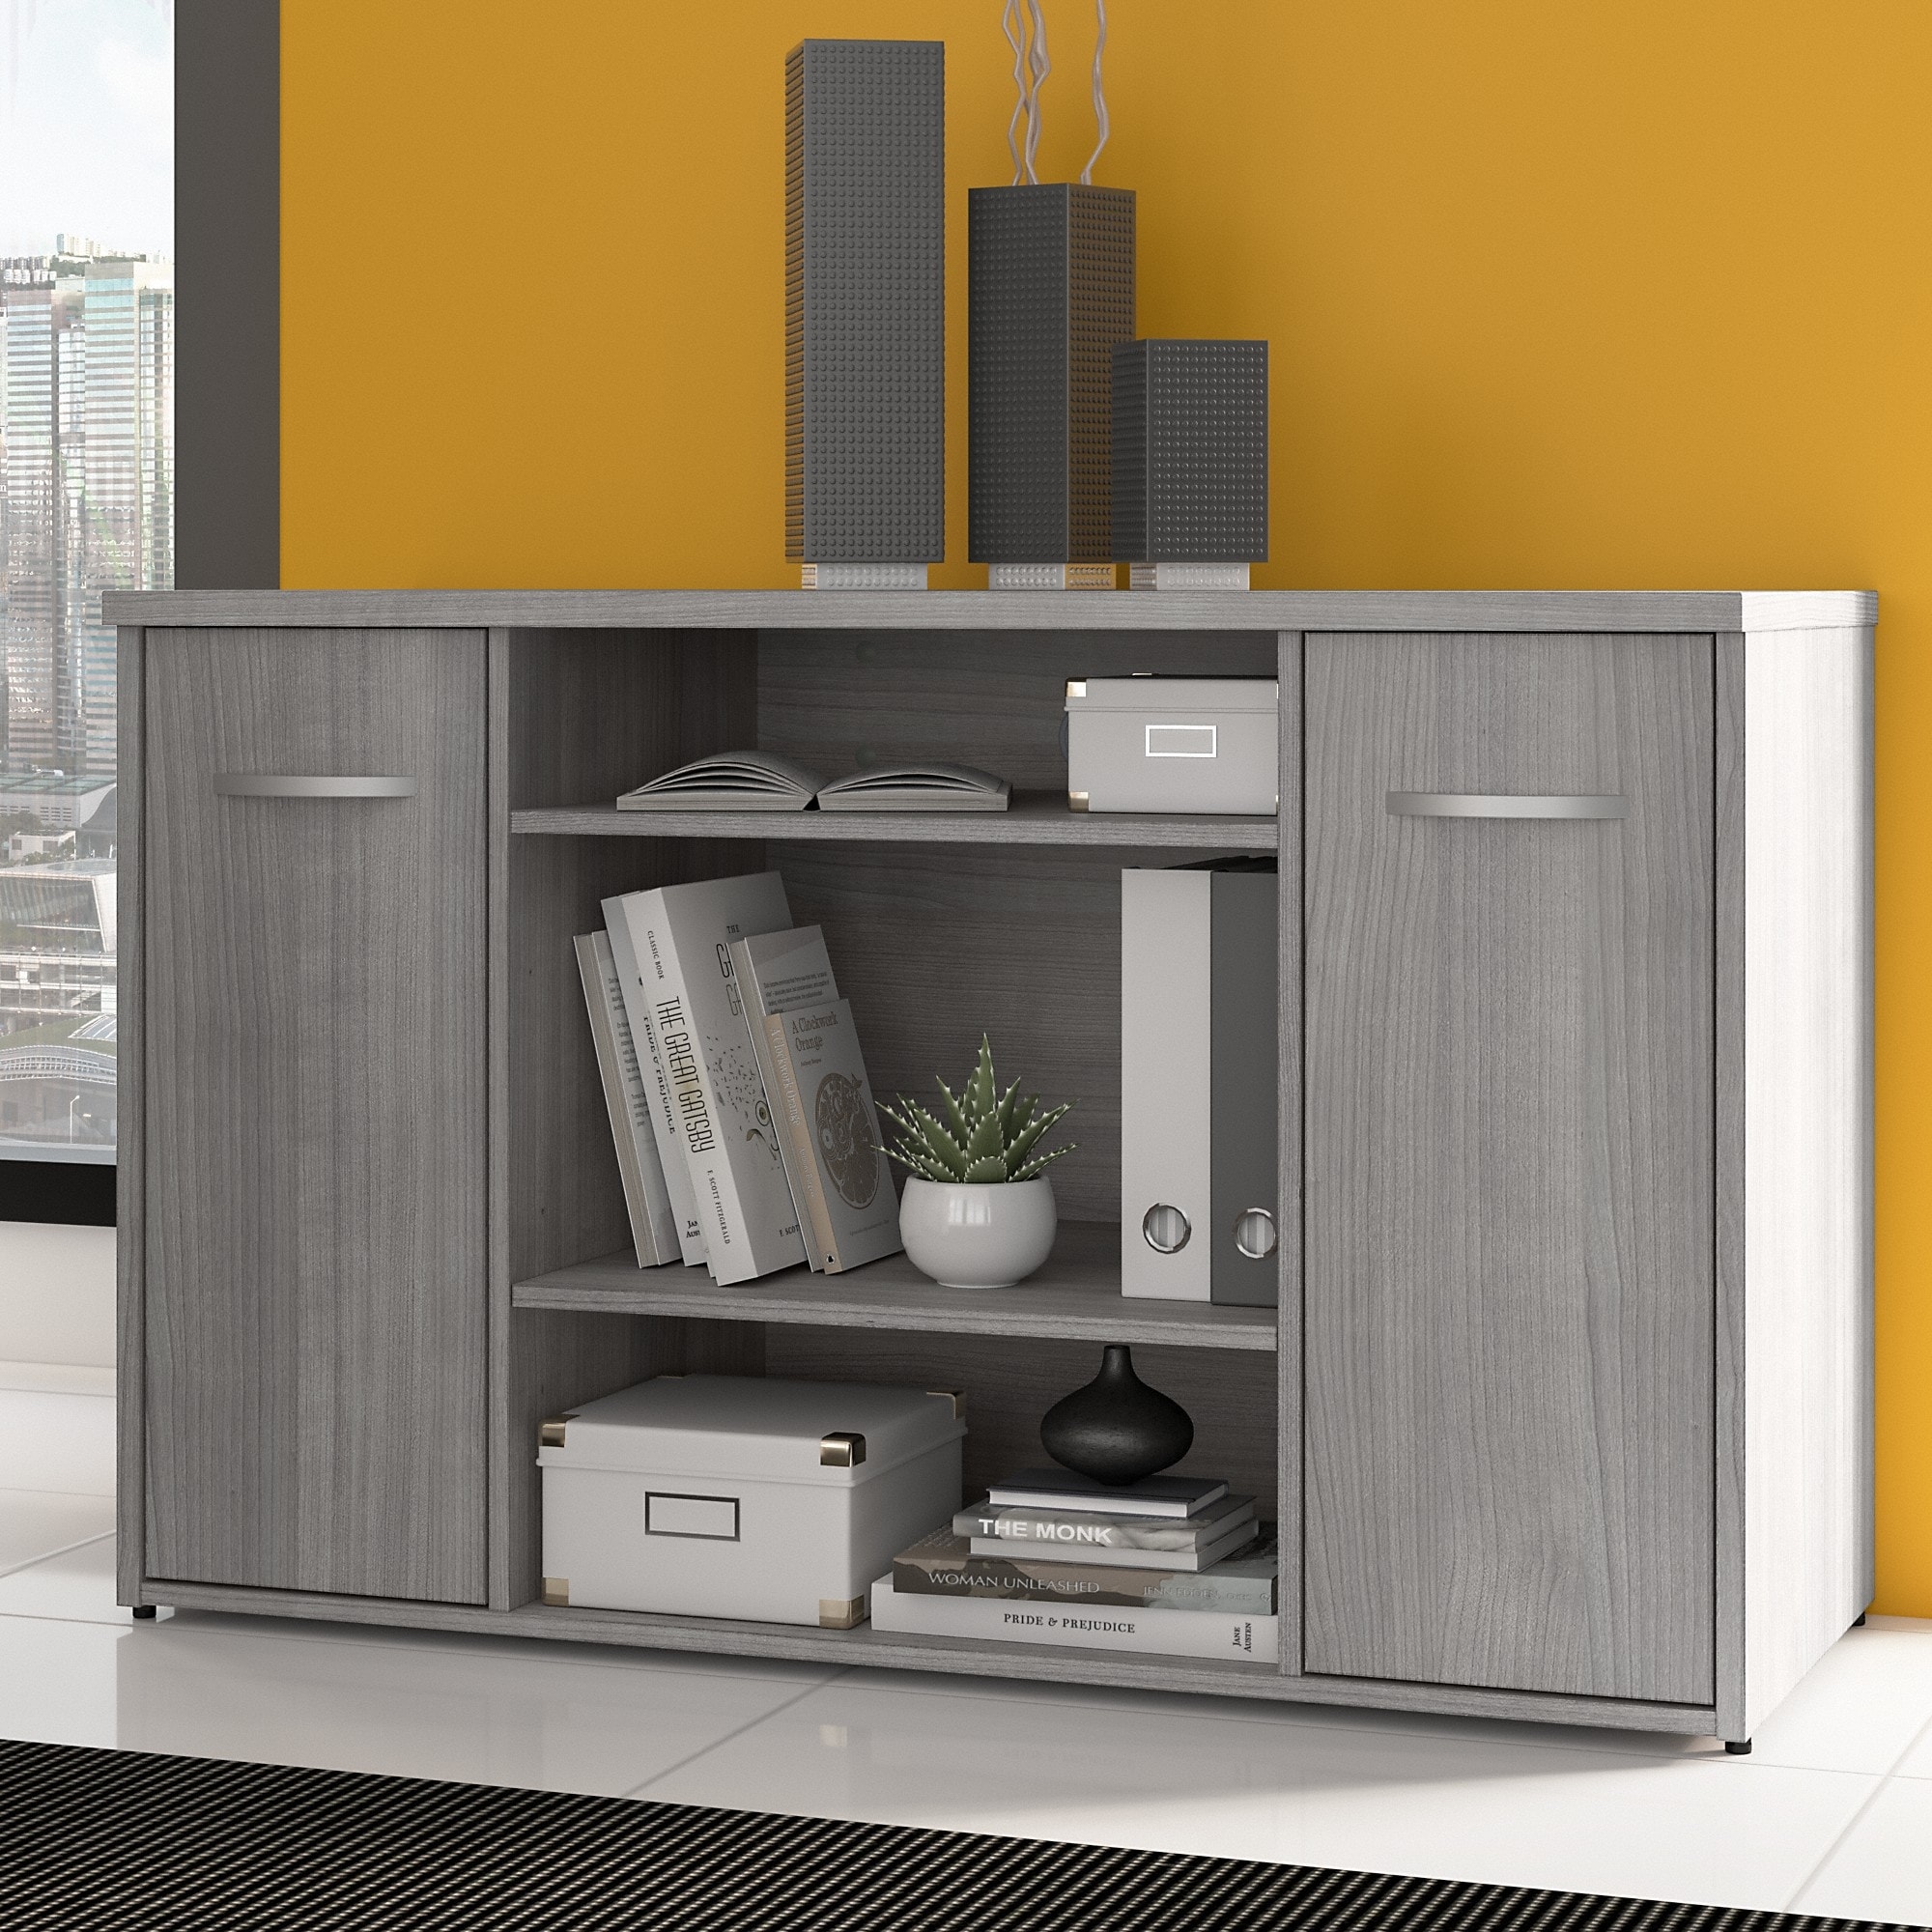 Universal Tall Narrow Storage Cabinet by Bush Business Furniture